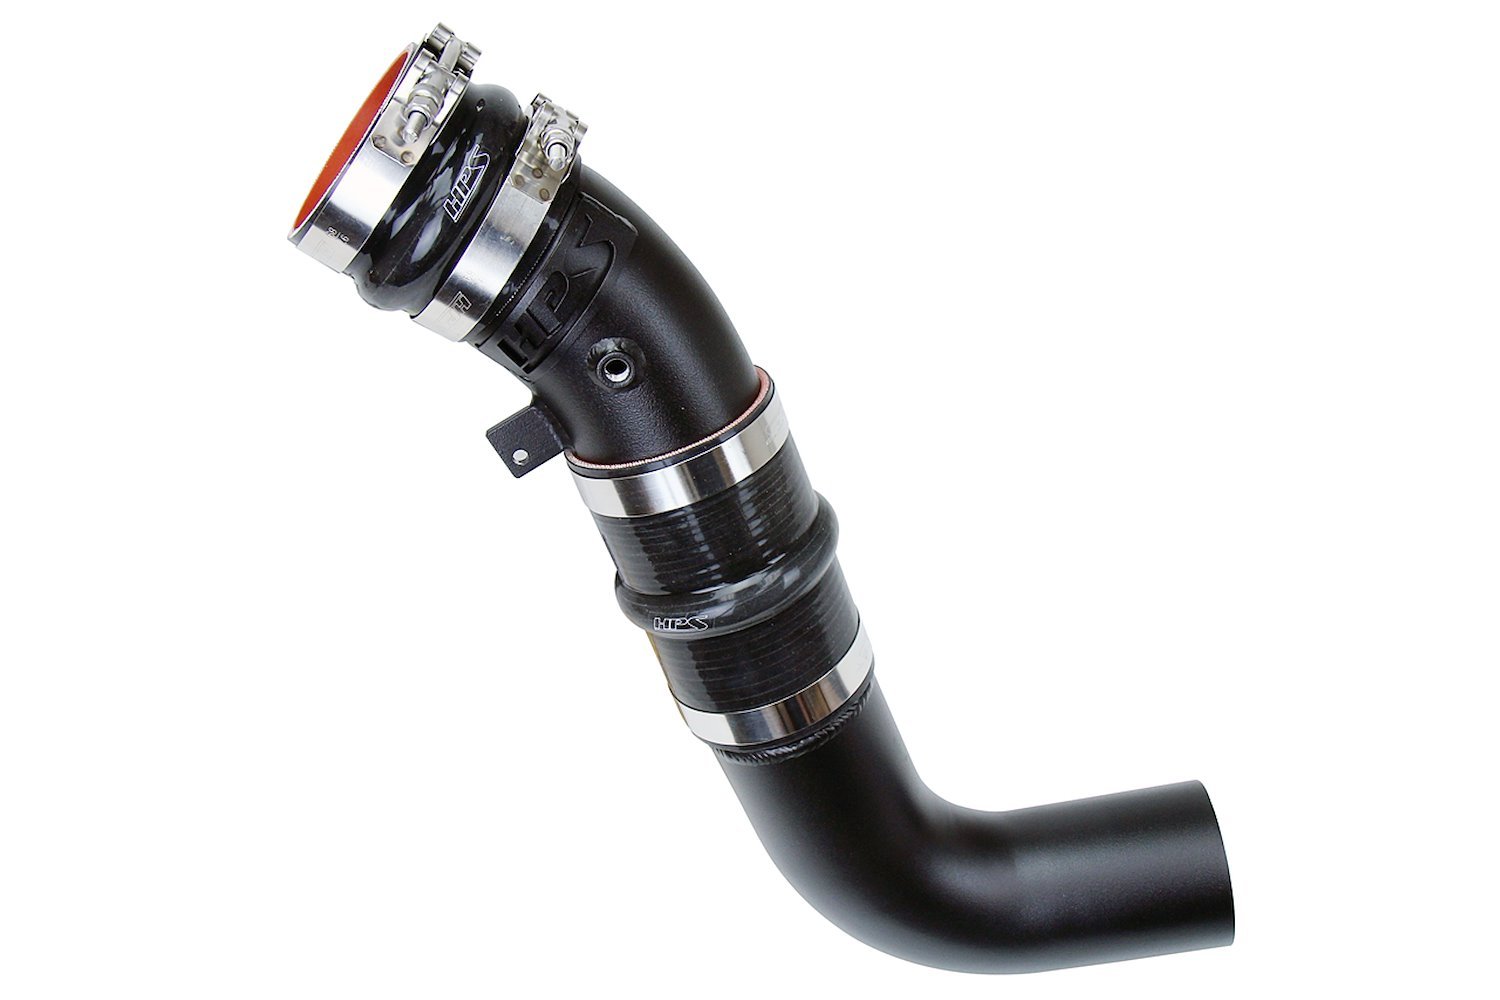 17-120WB Turbo Charge Pipe Kit, 3.5 in. Pipe Size, 2 Pieces Design, High-Temp 4-Ply Reinforced Silicone CAC Boots